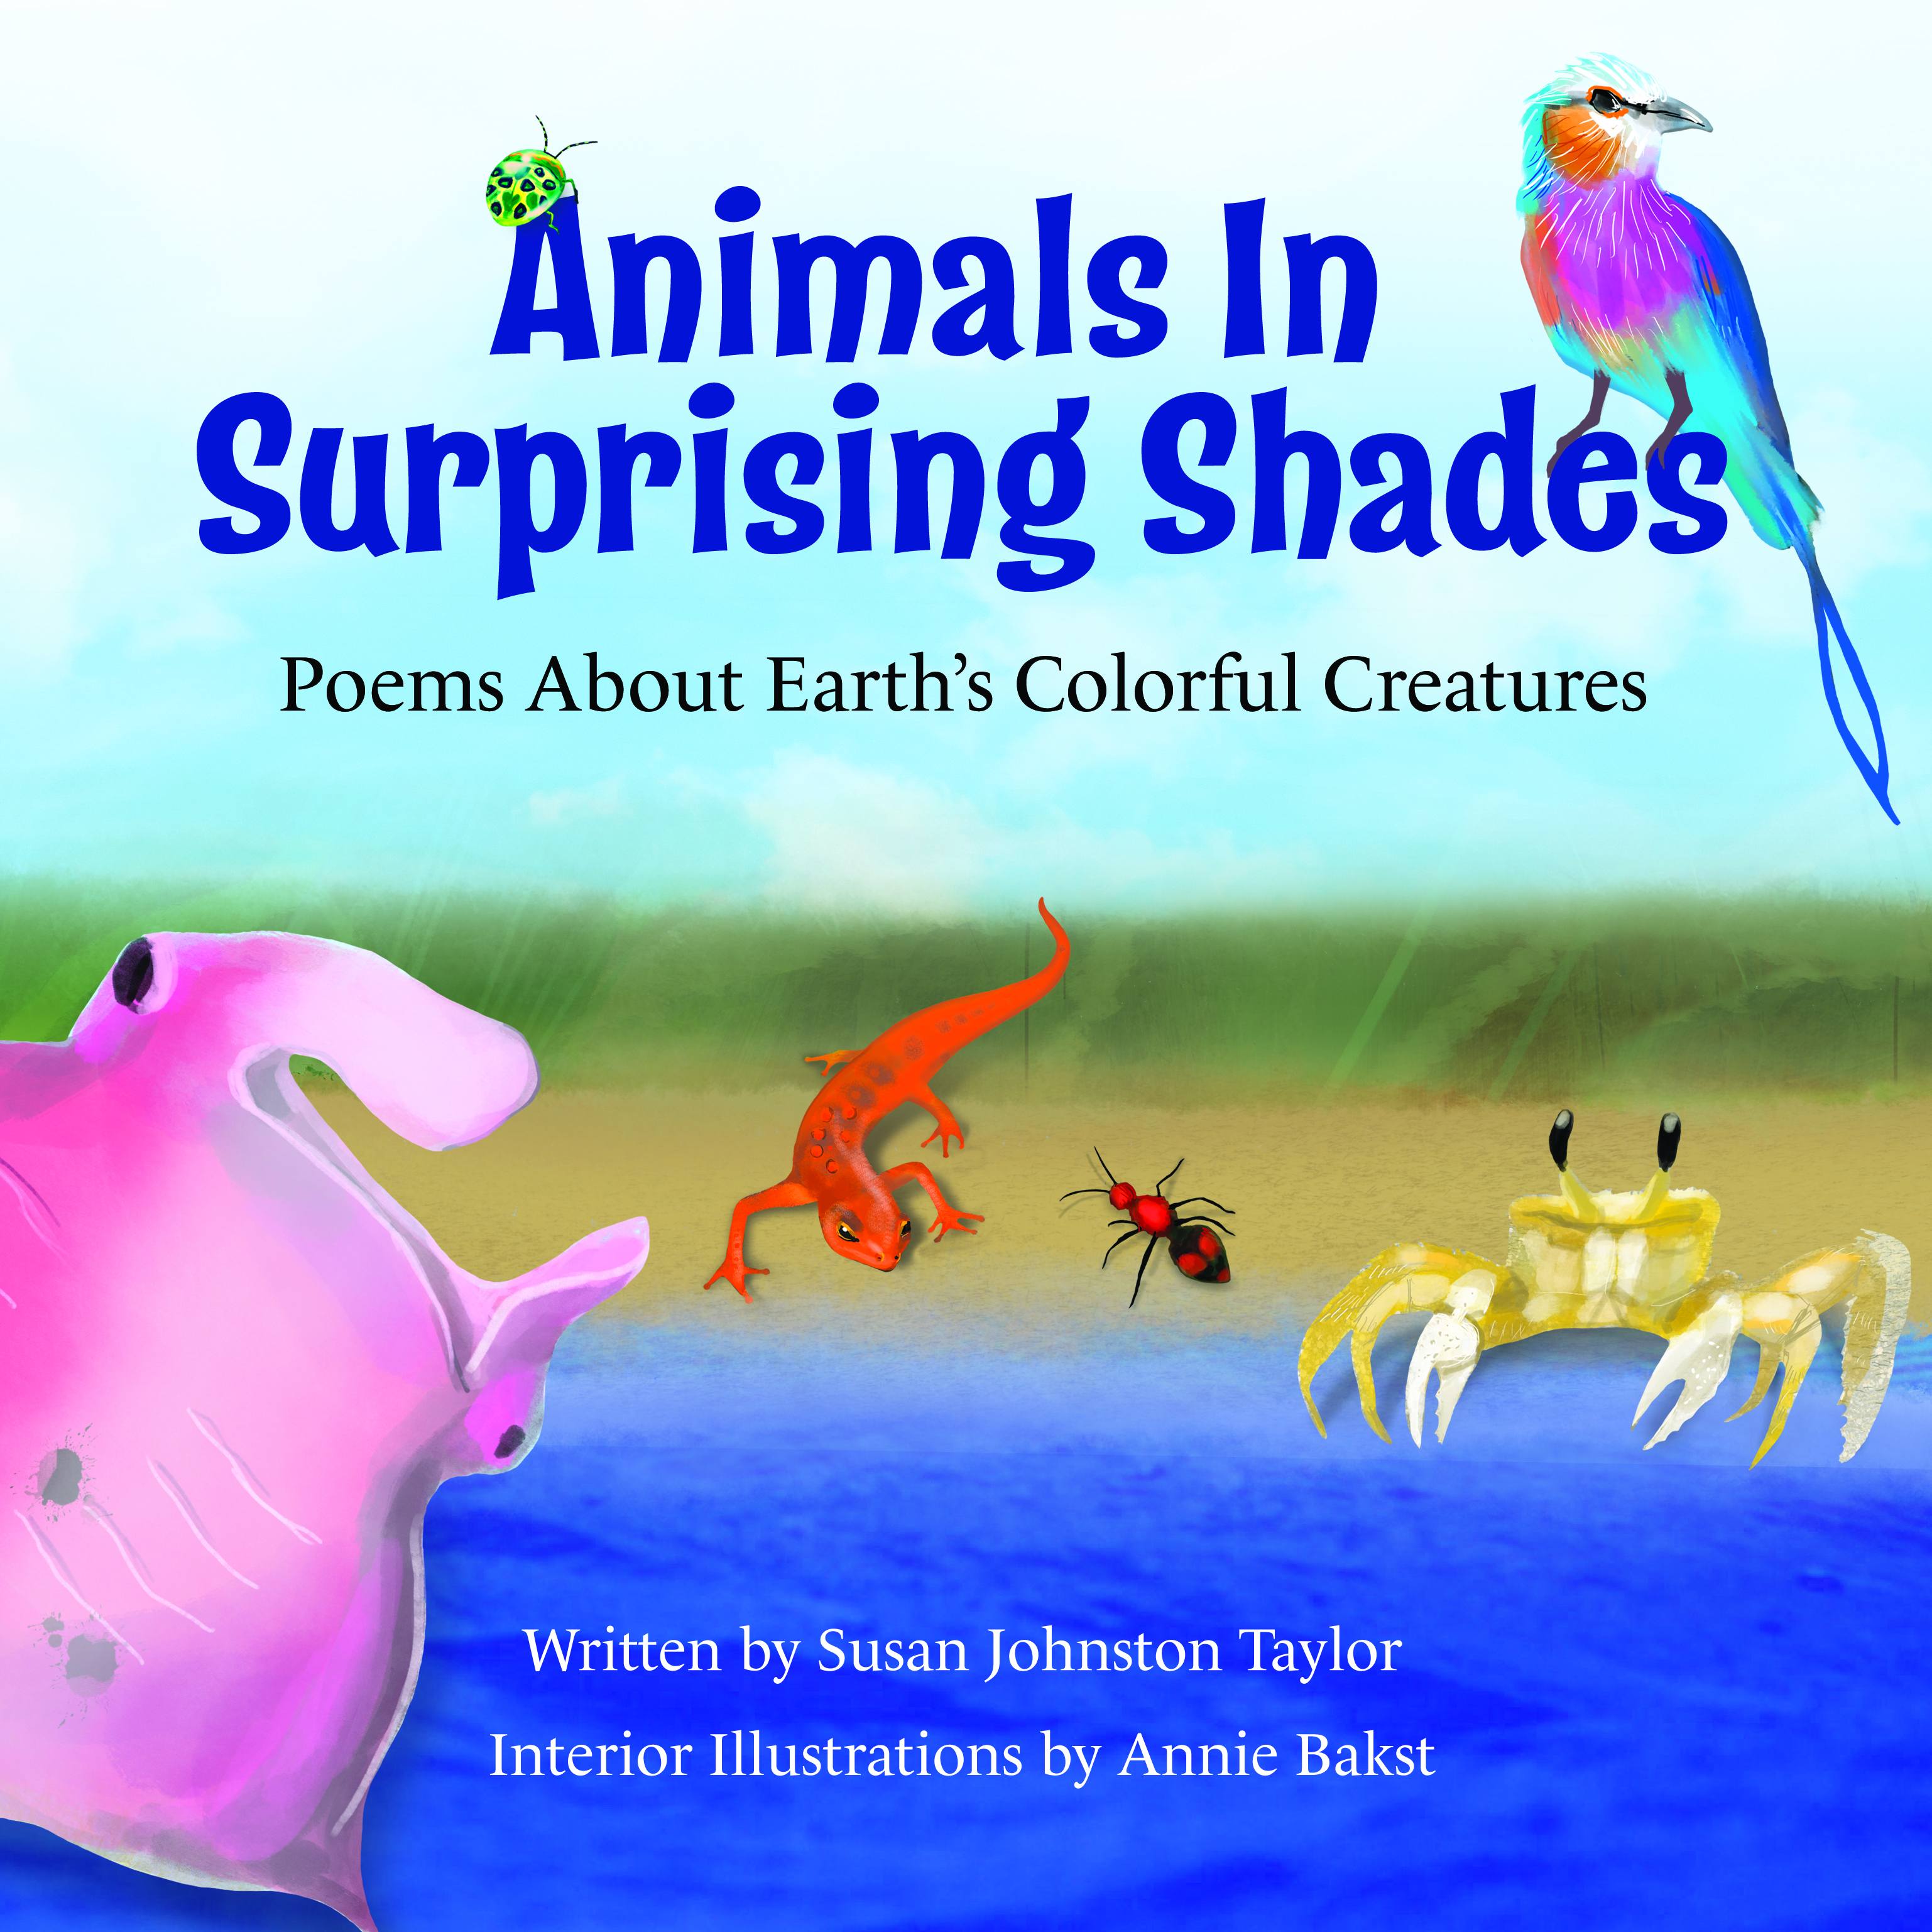 Cover Reveal for ANIMALS IN SURPRISING SHADES: POEMS ABOUT EARTH'S COLORFUL  CREATURES by Author Susan Johnston Taylor - Writing Barn